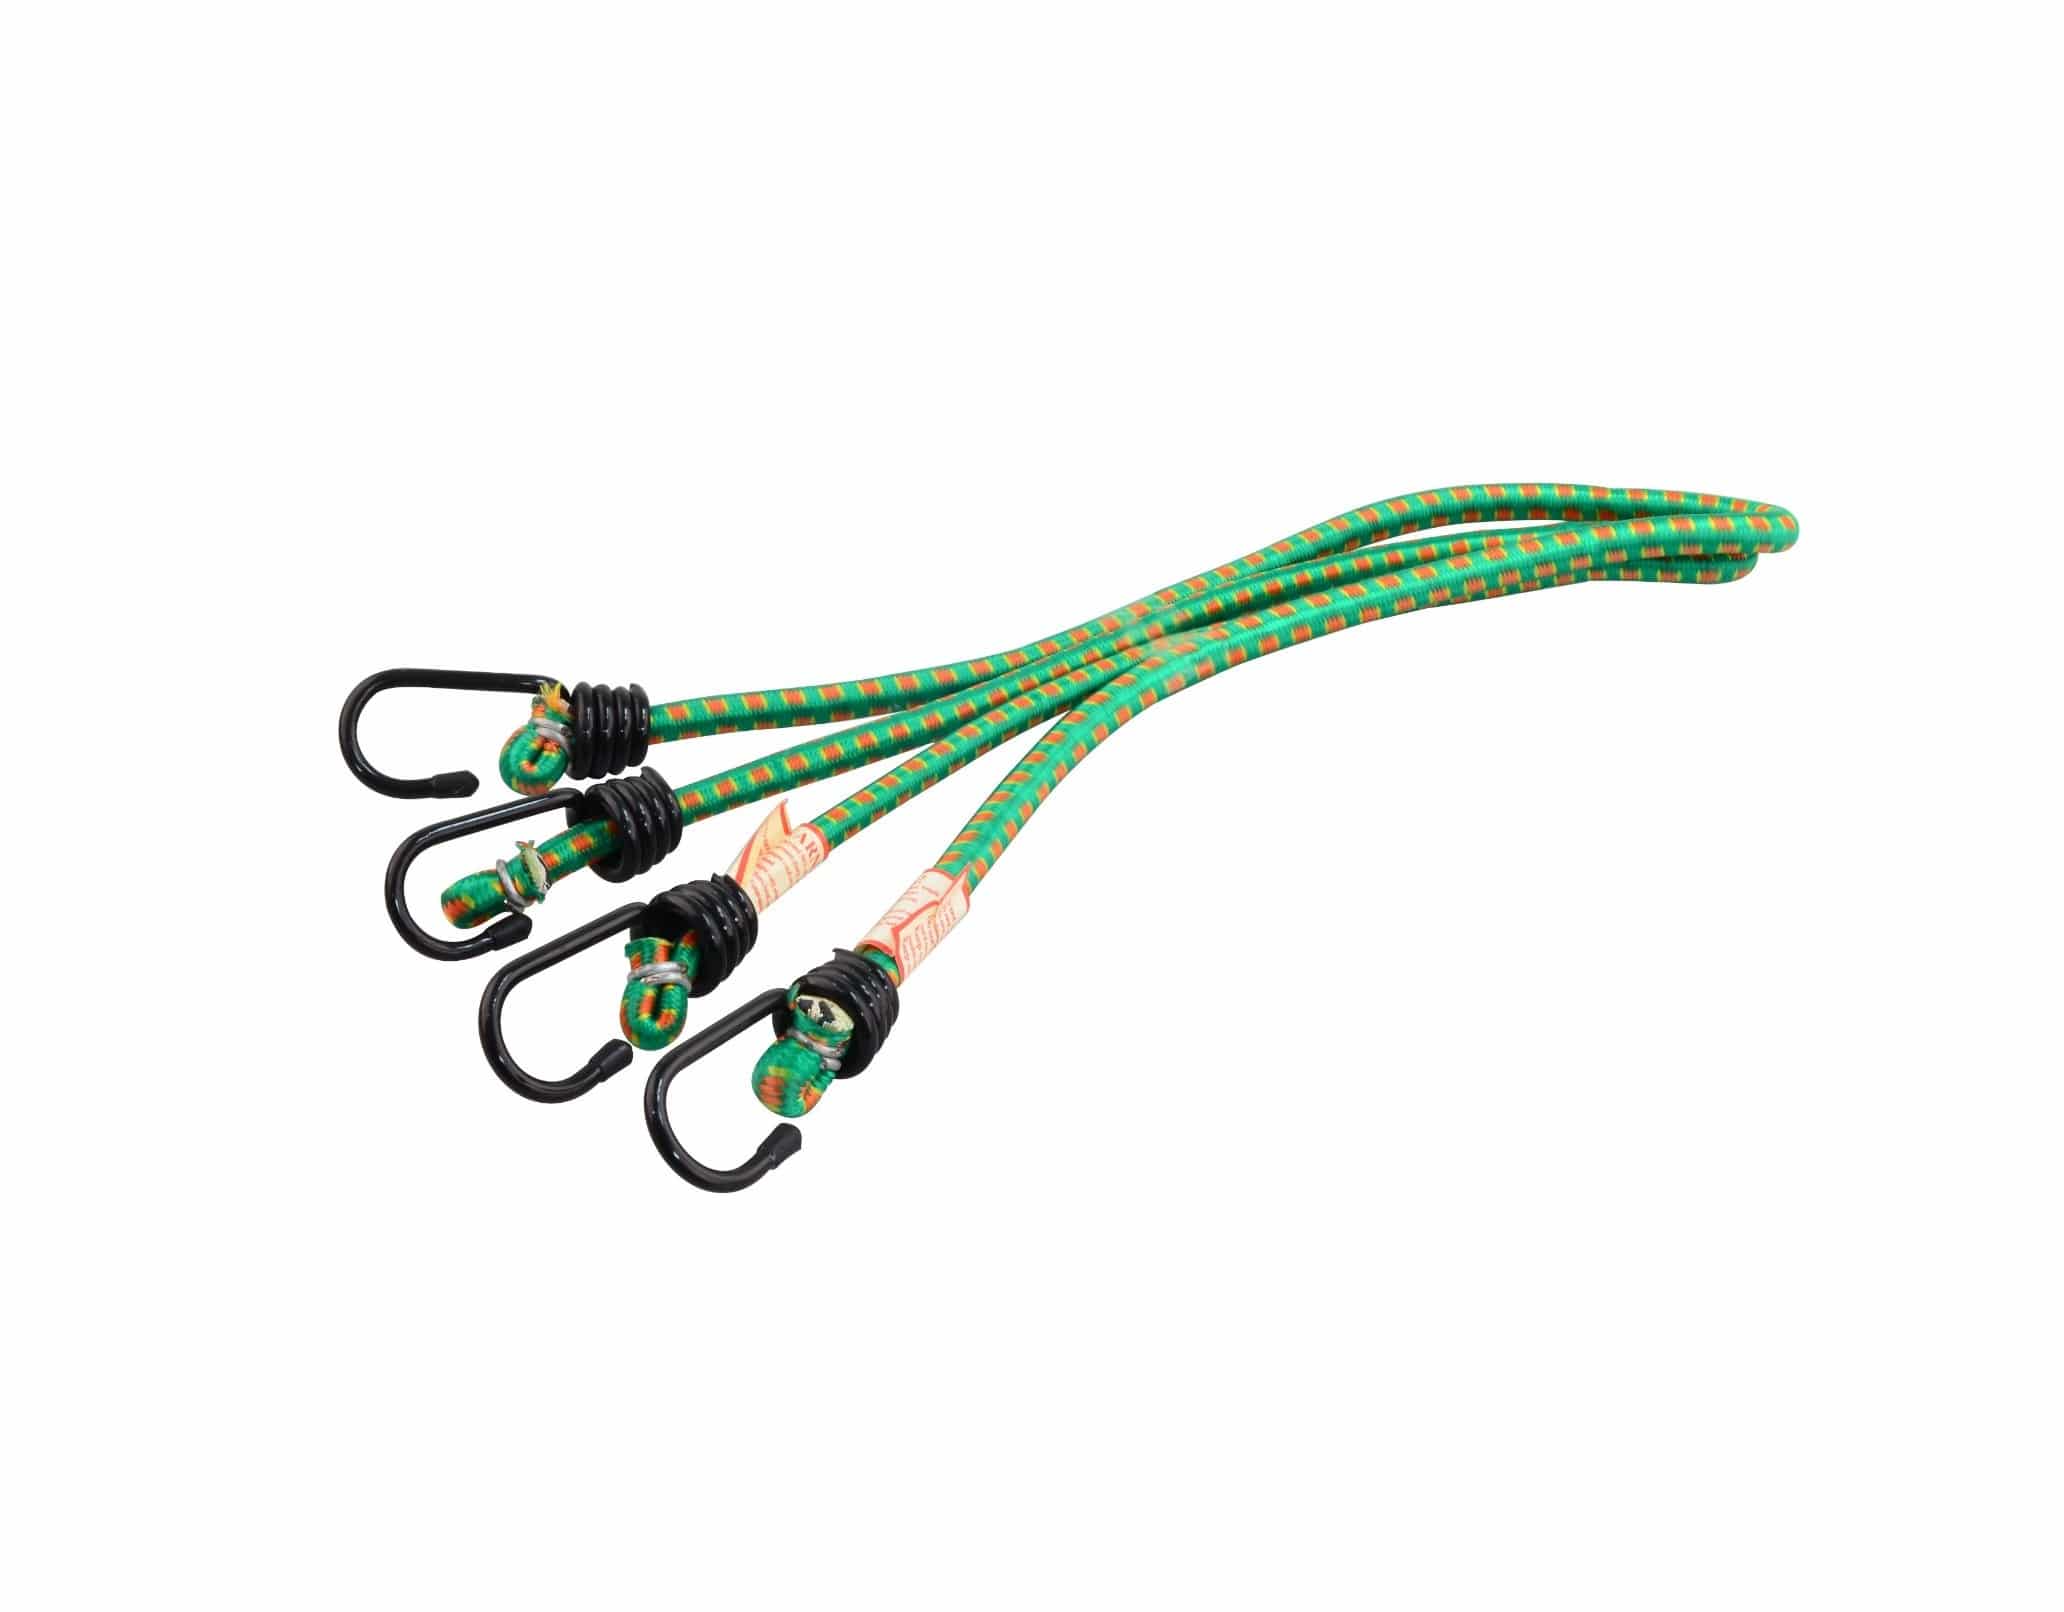 900mm x 12mm Bungee Cord